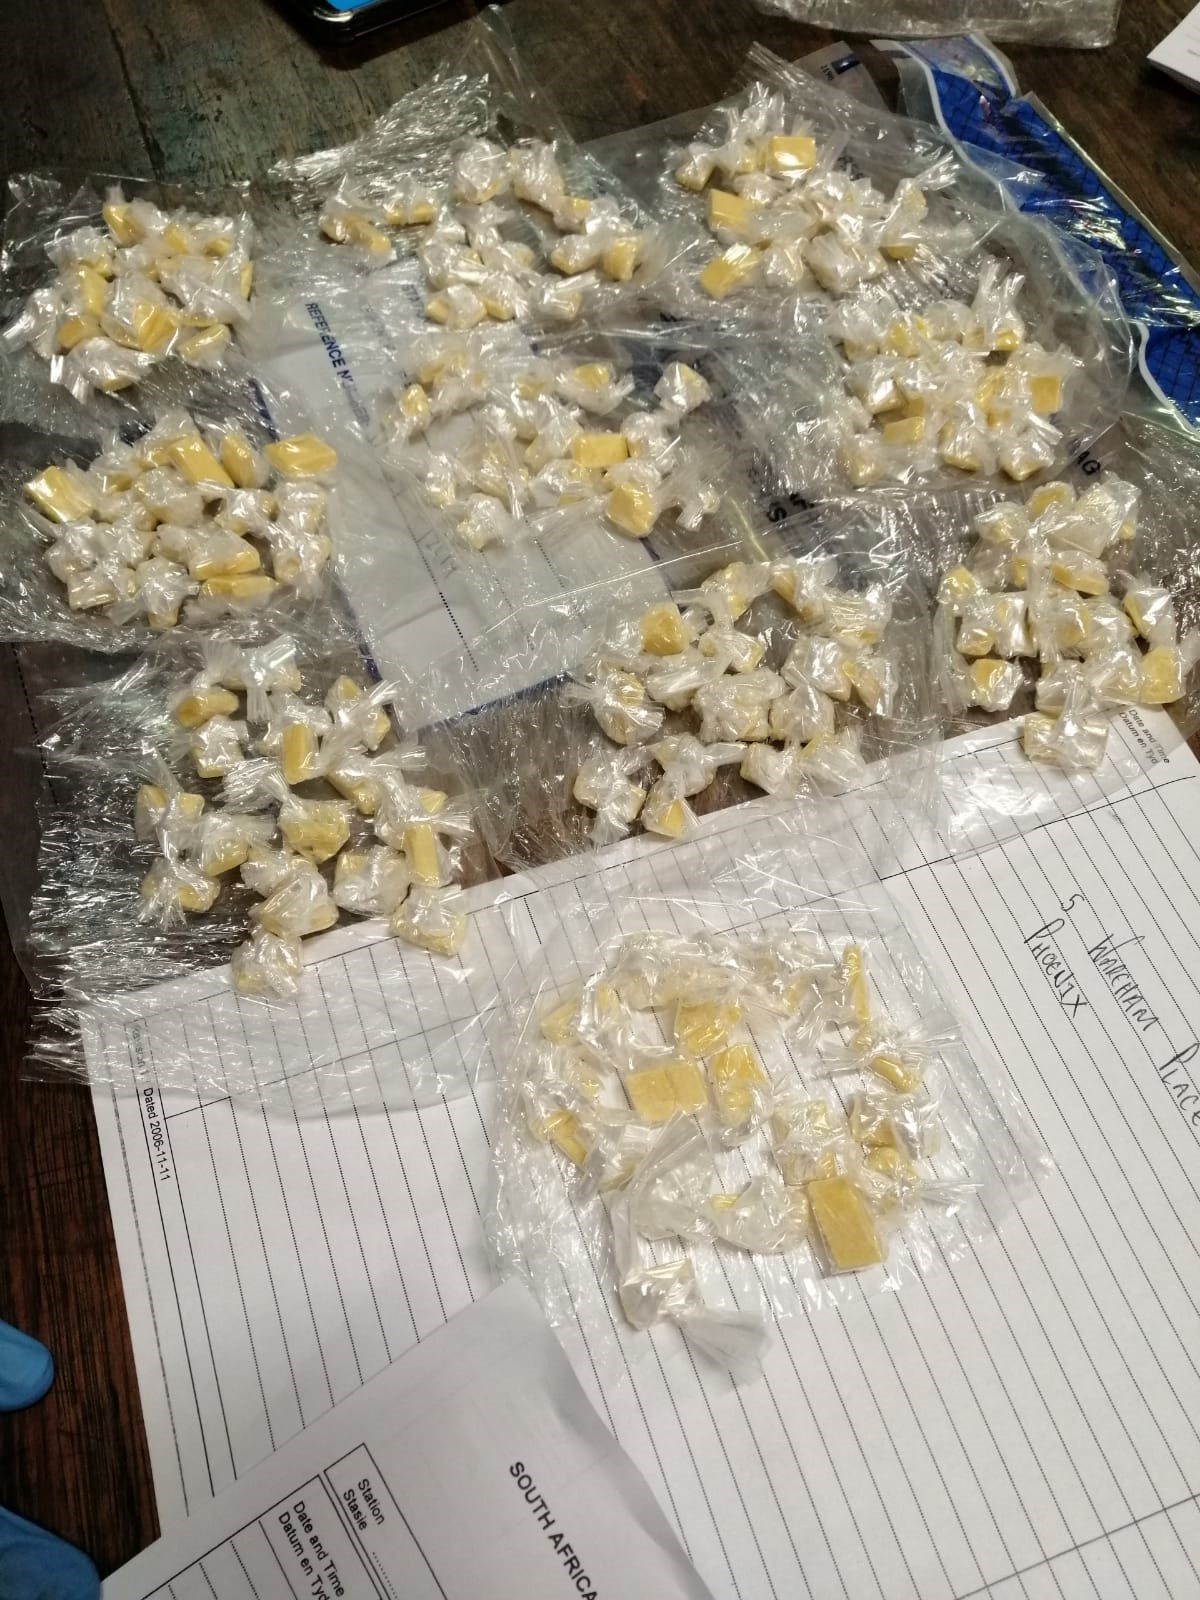 Drug dealer arrested in Verulam in possession of rock cocaine and heroin capsules